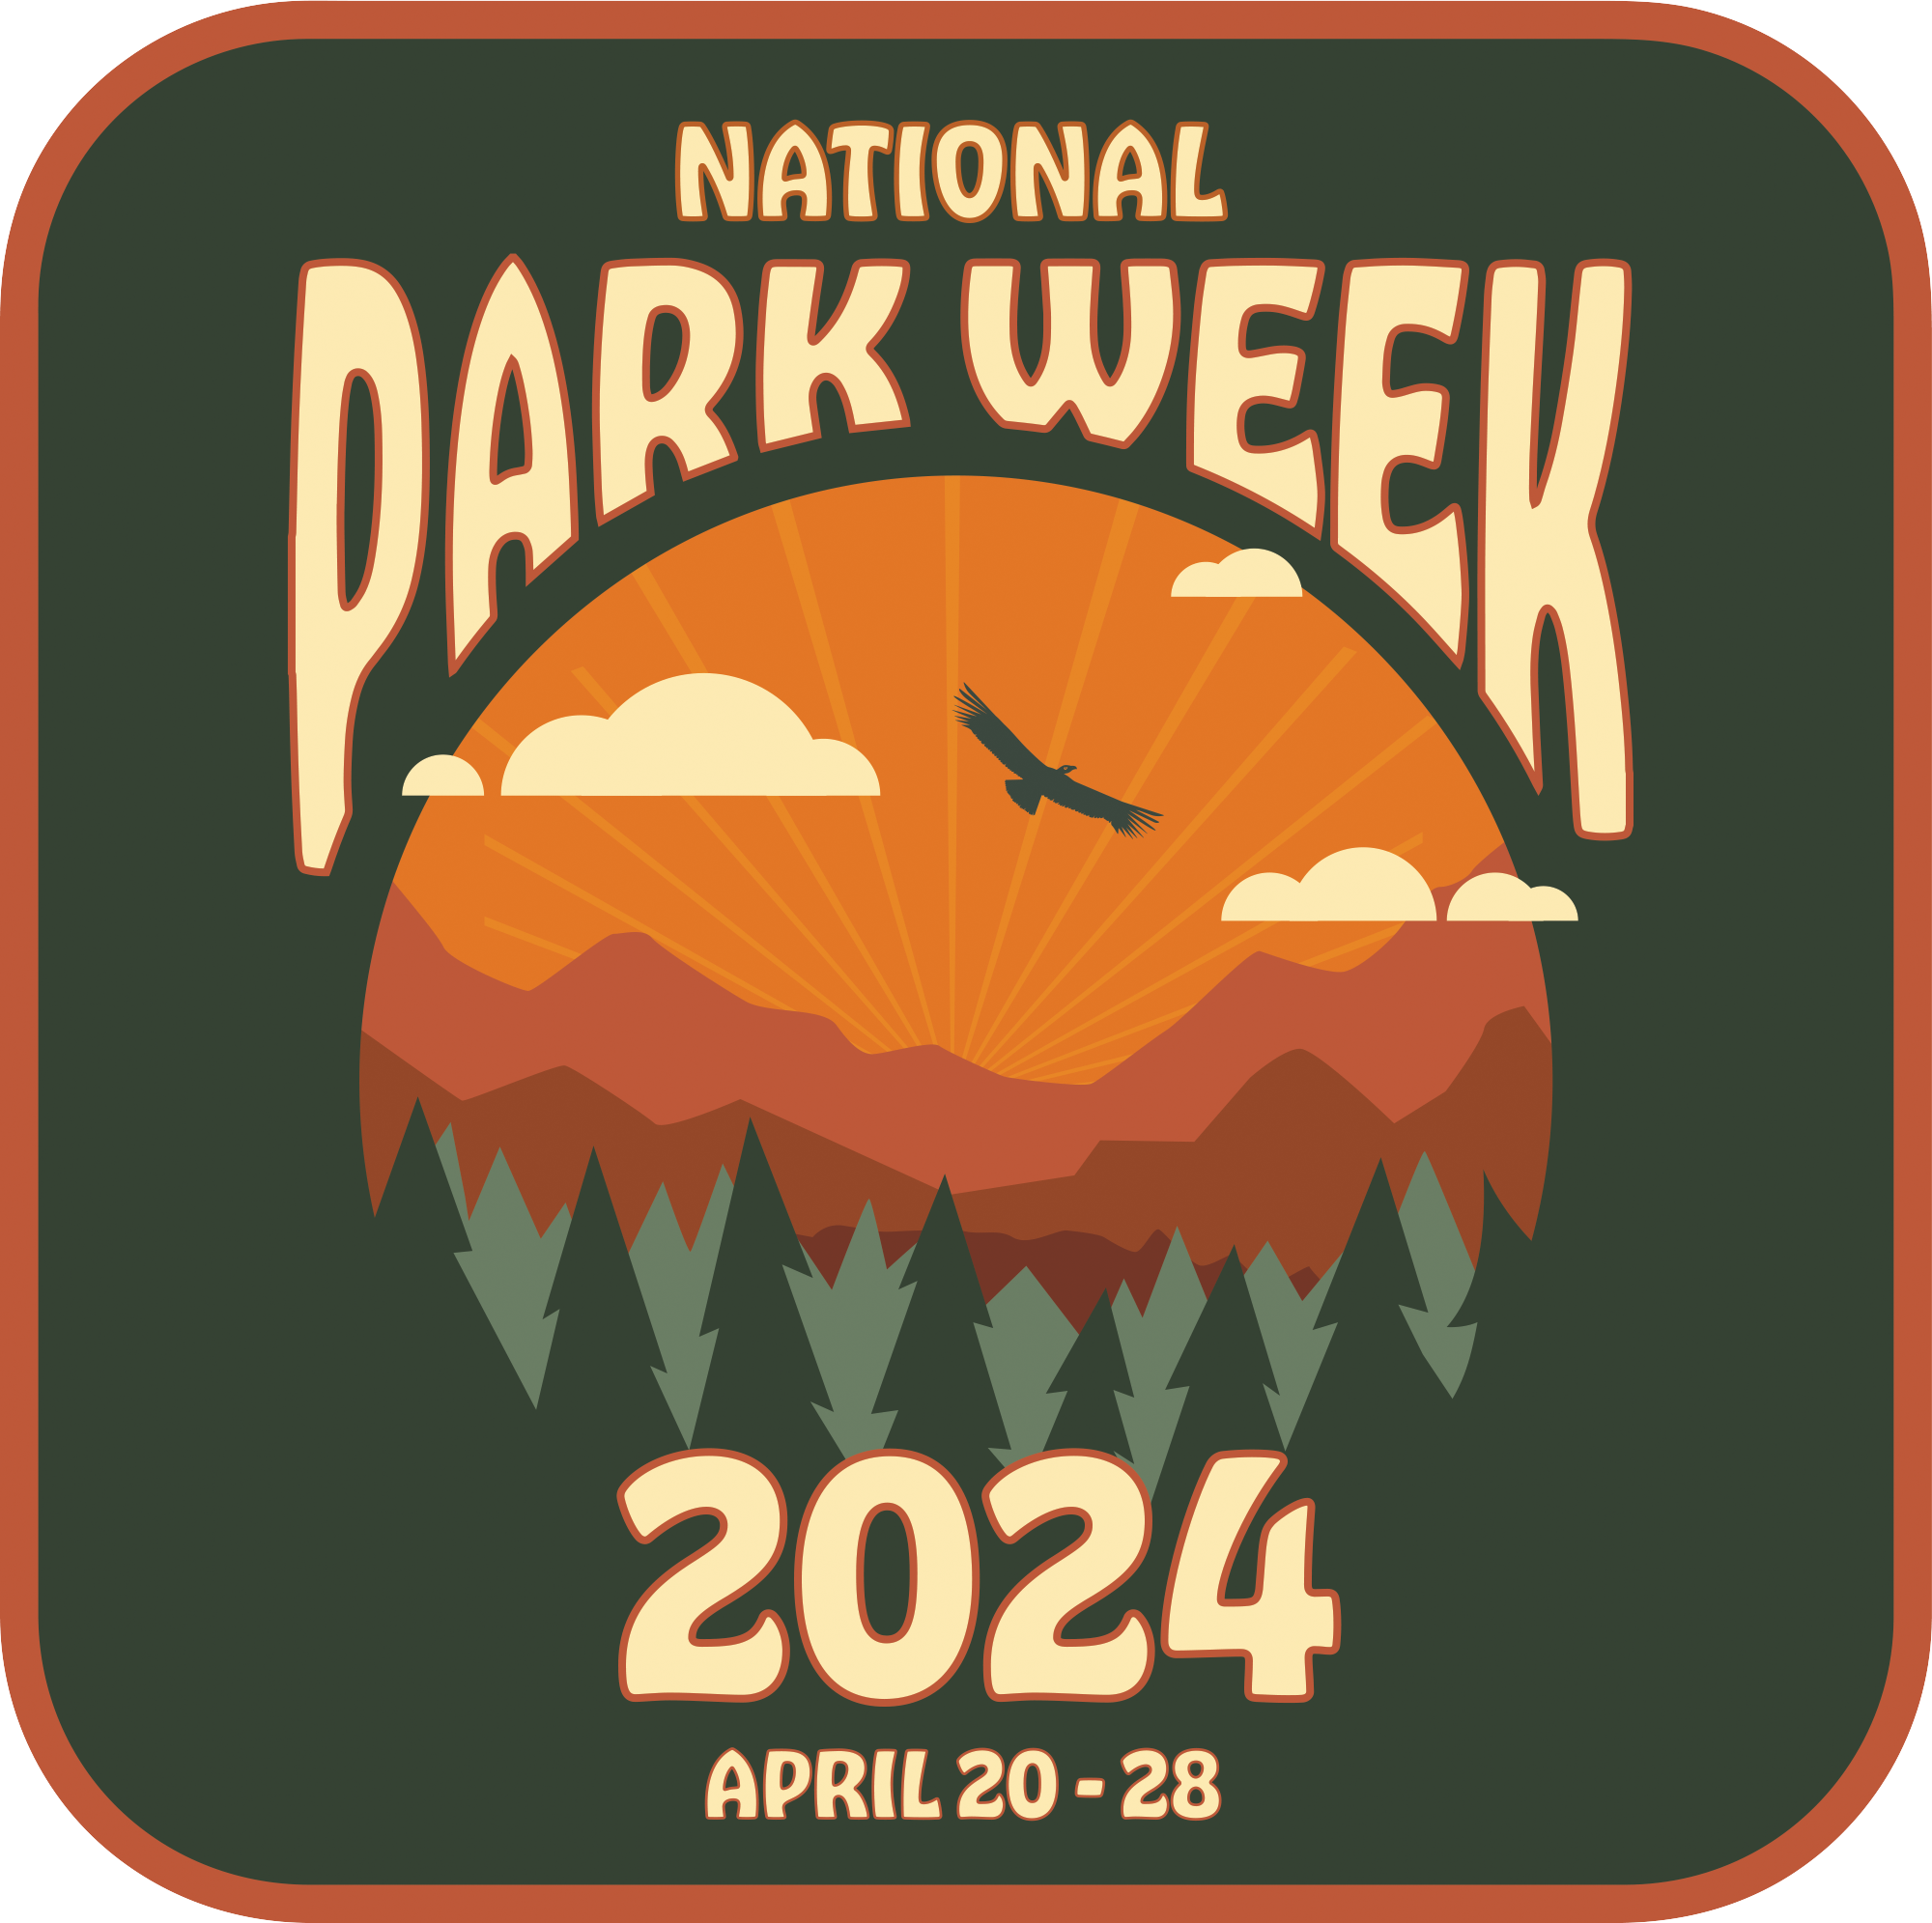 National Park Week 2024 April 20-28 with stylized image of sunset, mountains, trees, and a bird